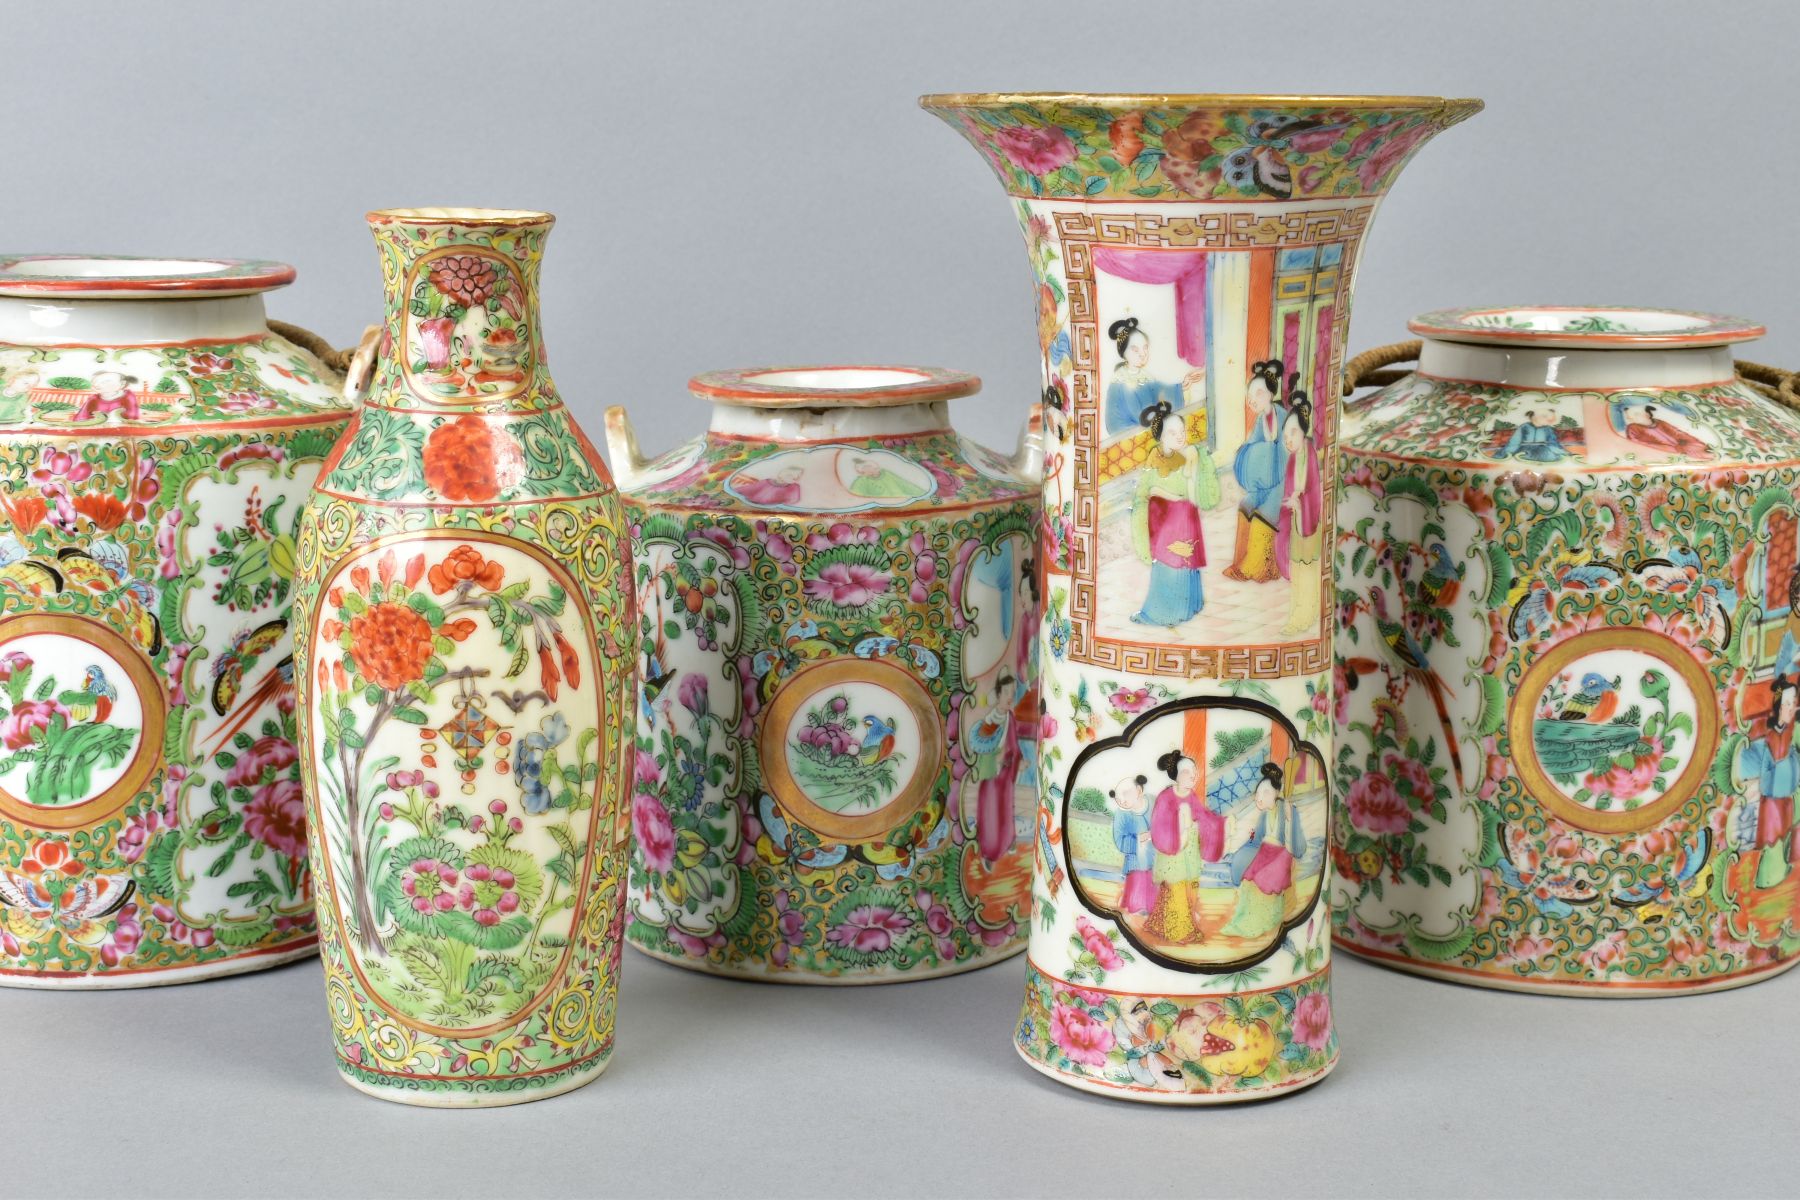 THREE 19TH CENTURY CHINESE CANTON FAMILLE ROSE TEAPOTS AND COVERS, two with wicker handles (s.d.), - Image 8 of 9